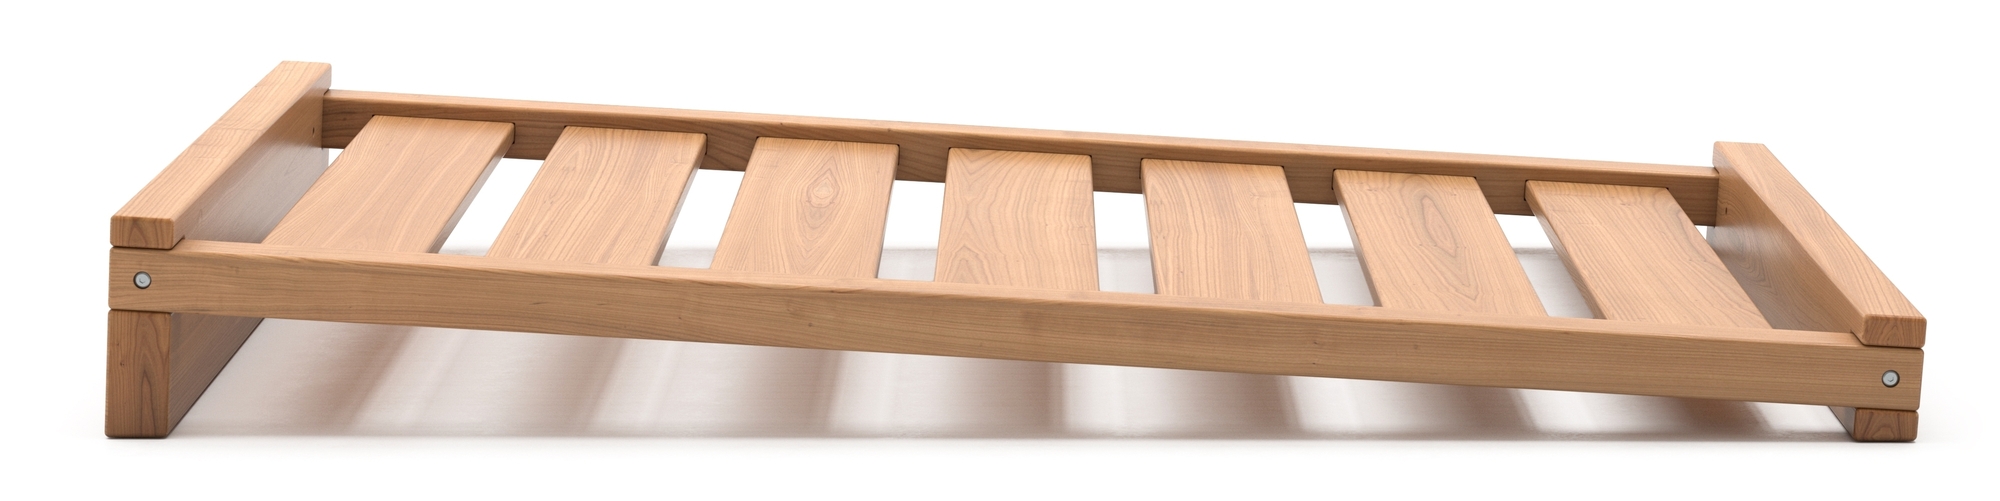 Solid wood Montessori toddler bed in an inclined position